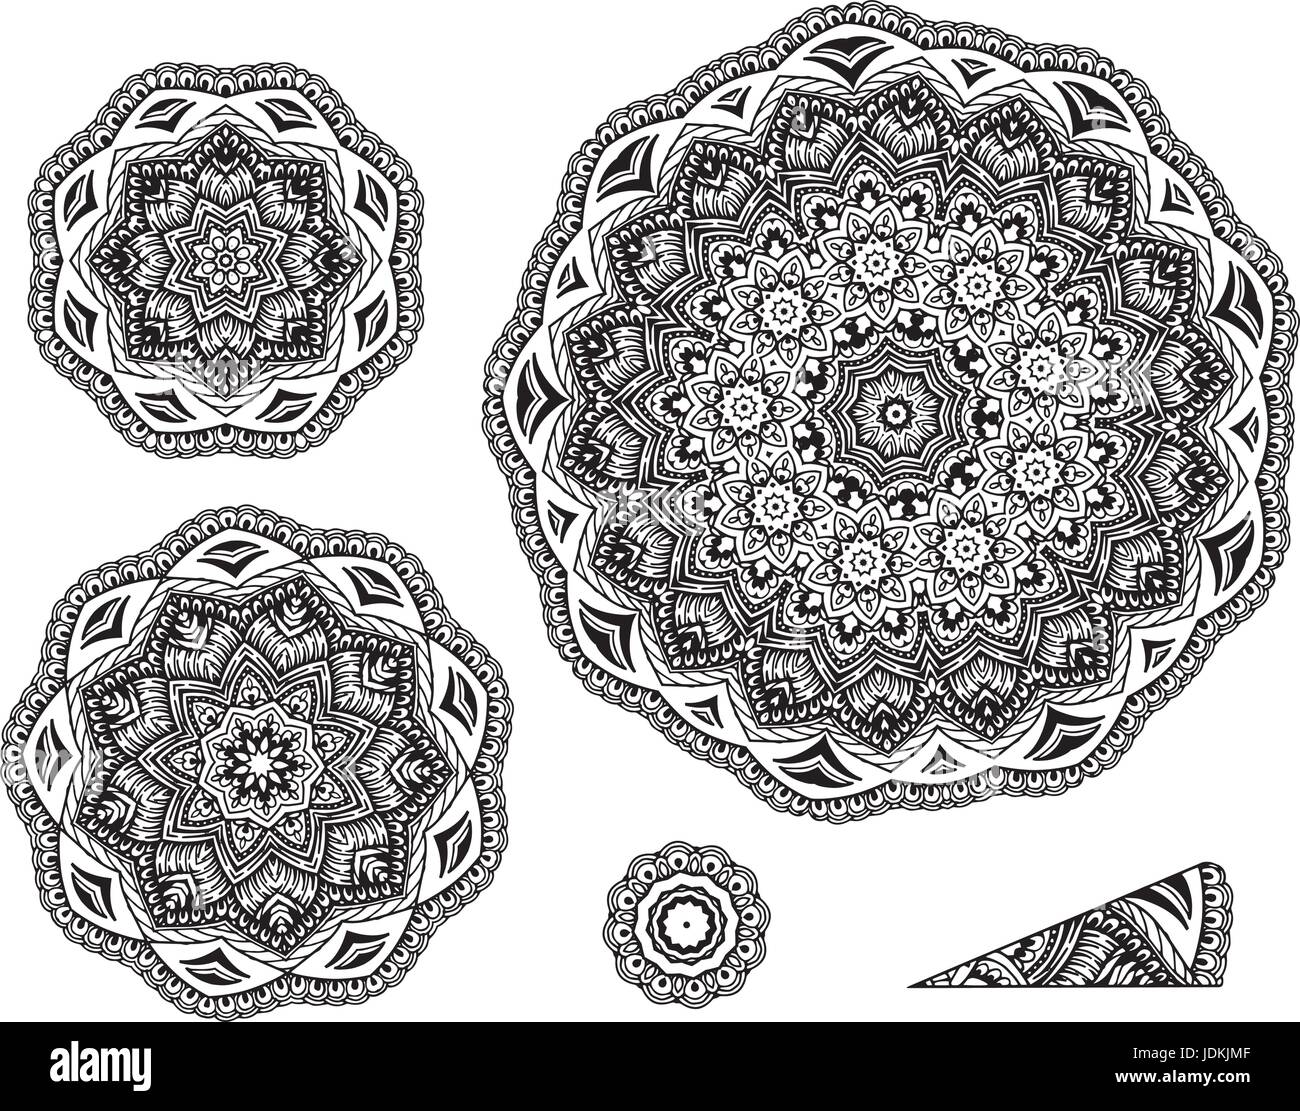 Linear carelessly drawn by hand a vector sketch ornamental mandala set. Abstract monochrome line art backdrop template collection. Black Florist decor Stock Vector